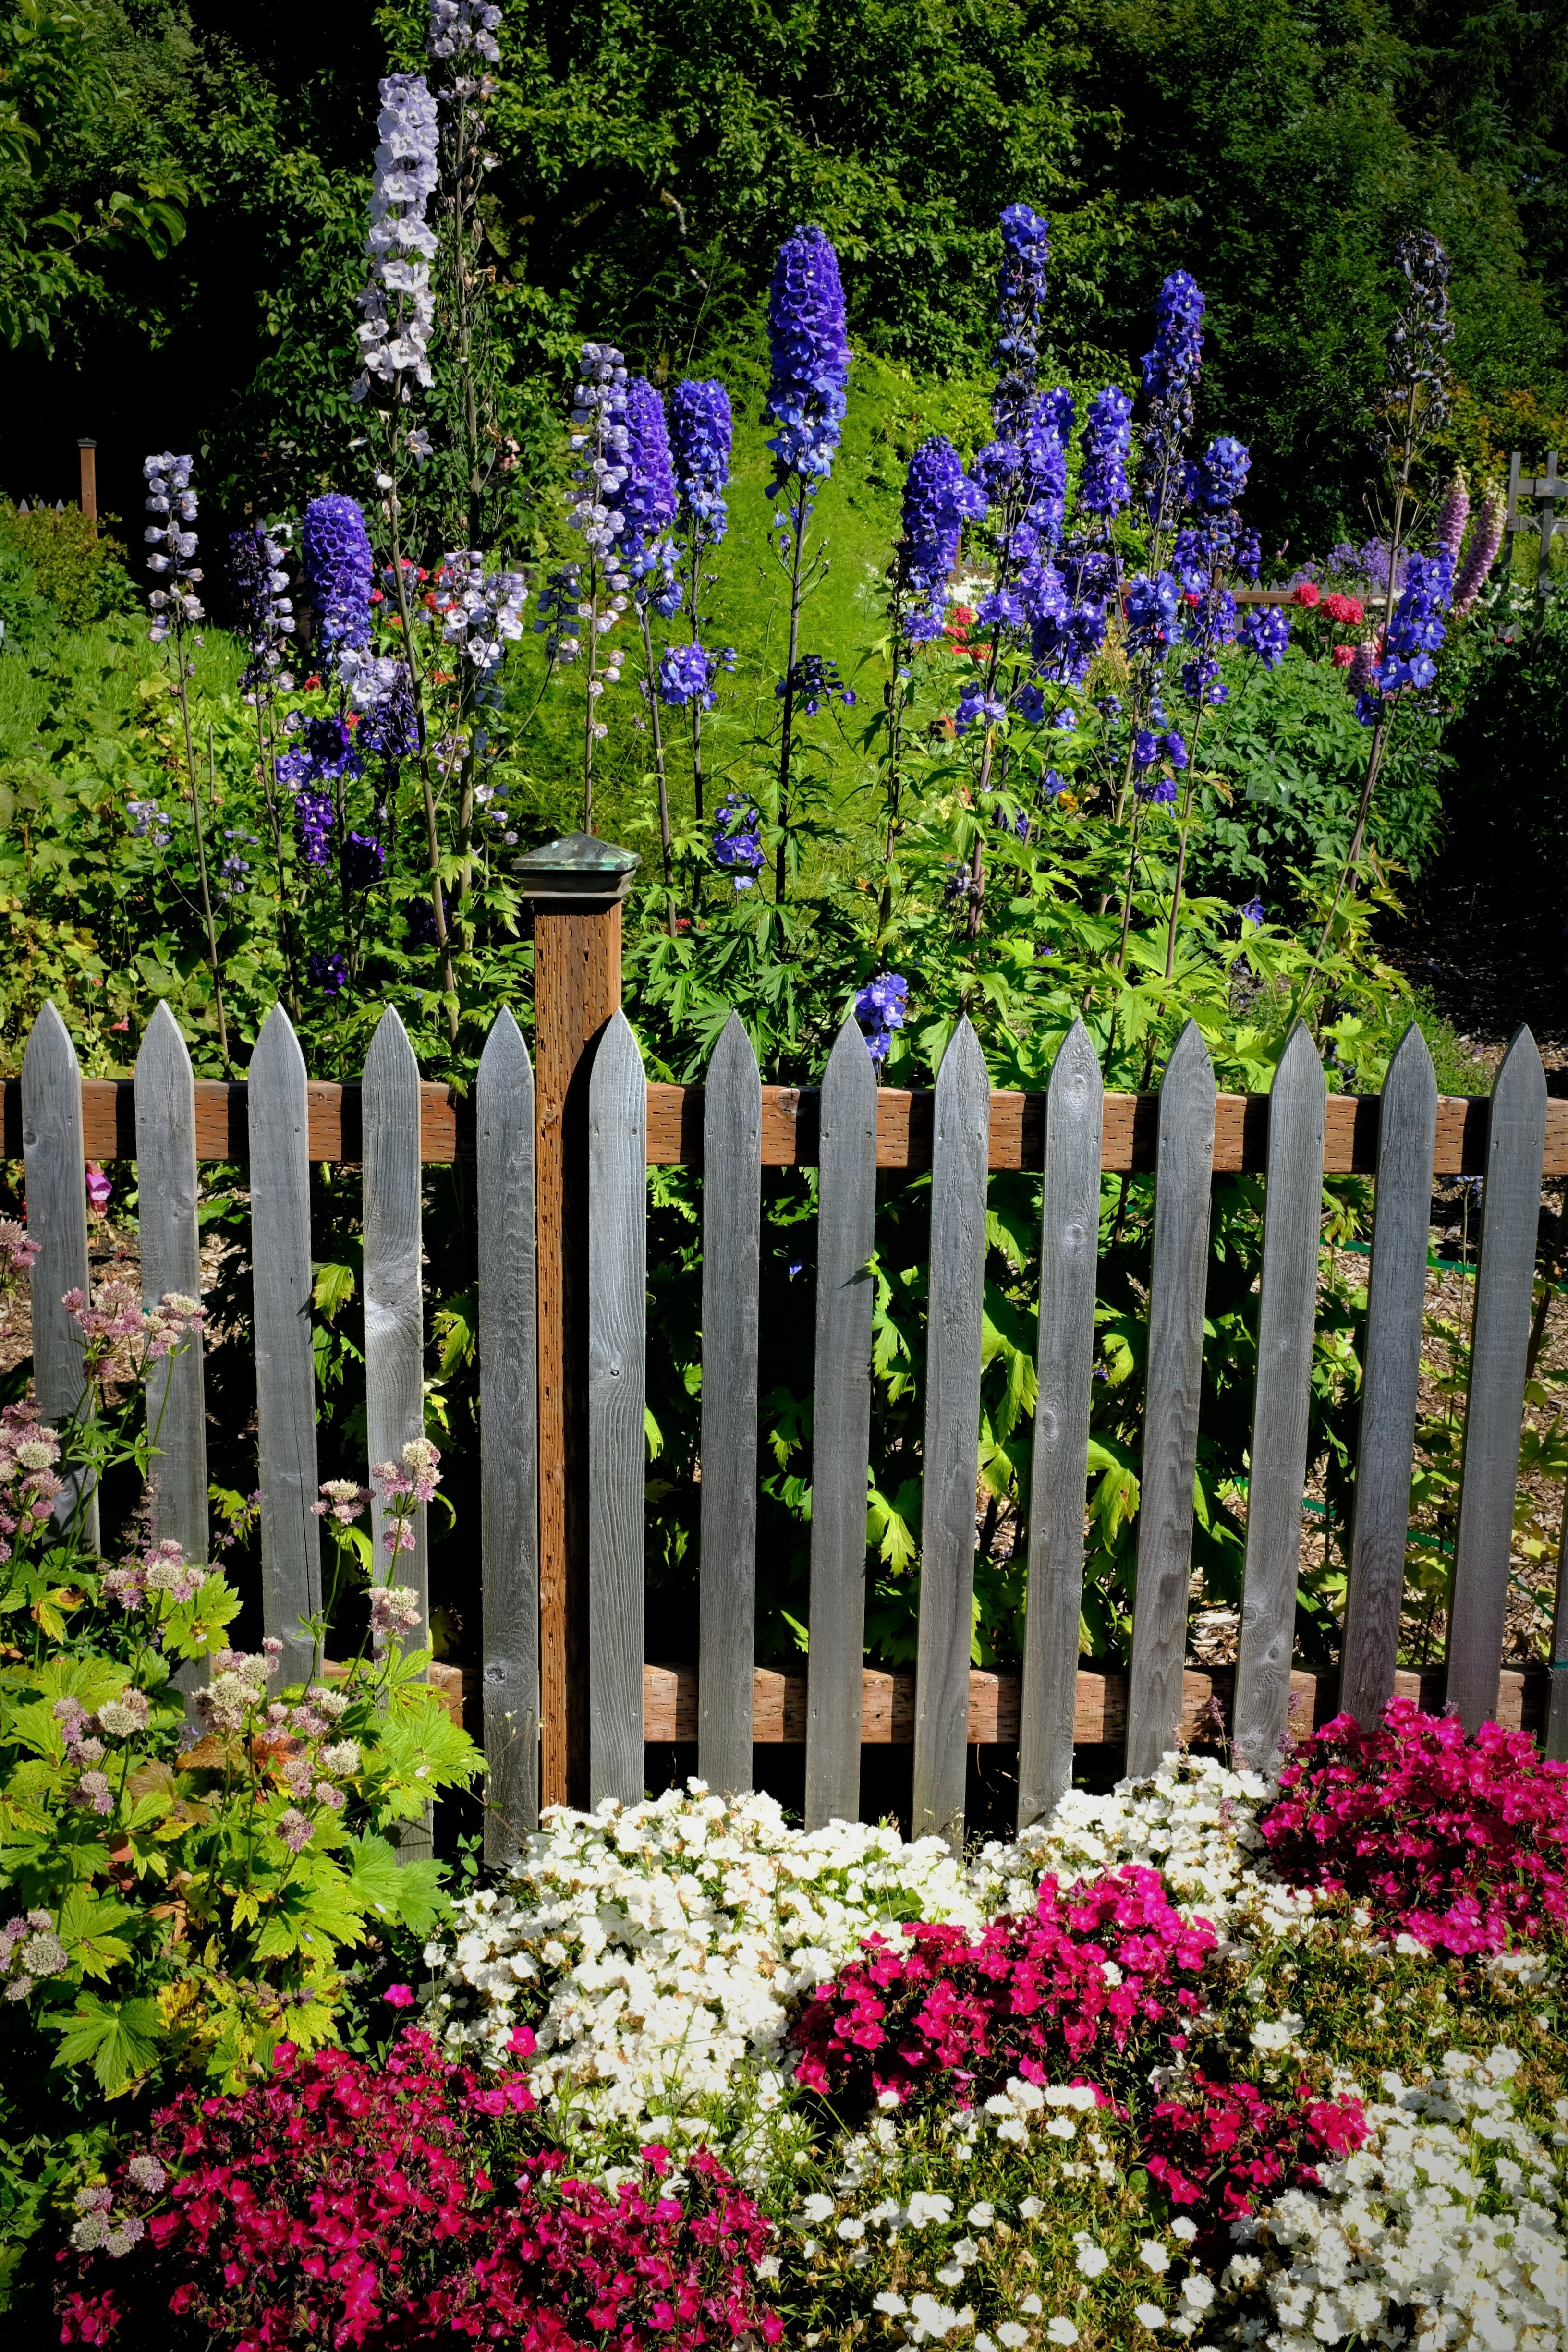 Close up of weather fence framed by vibrant flowers at the arboretum.